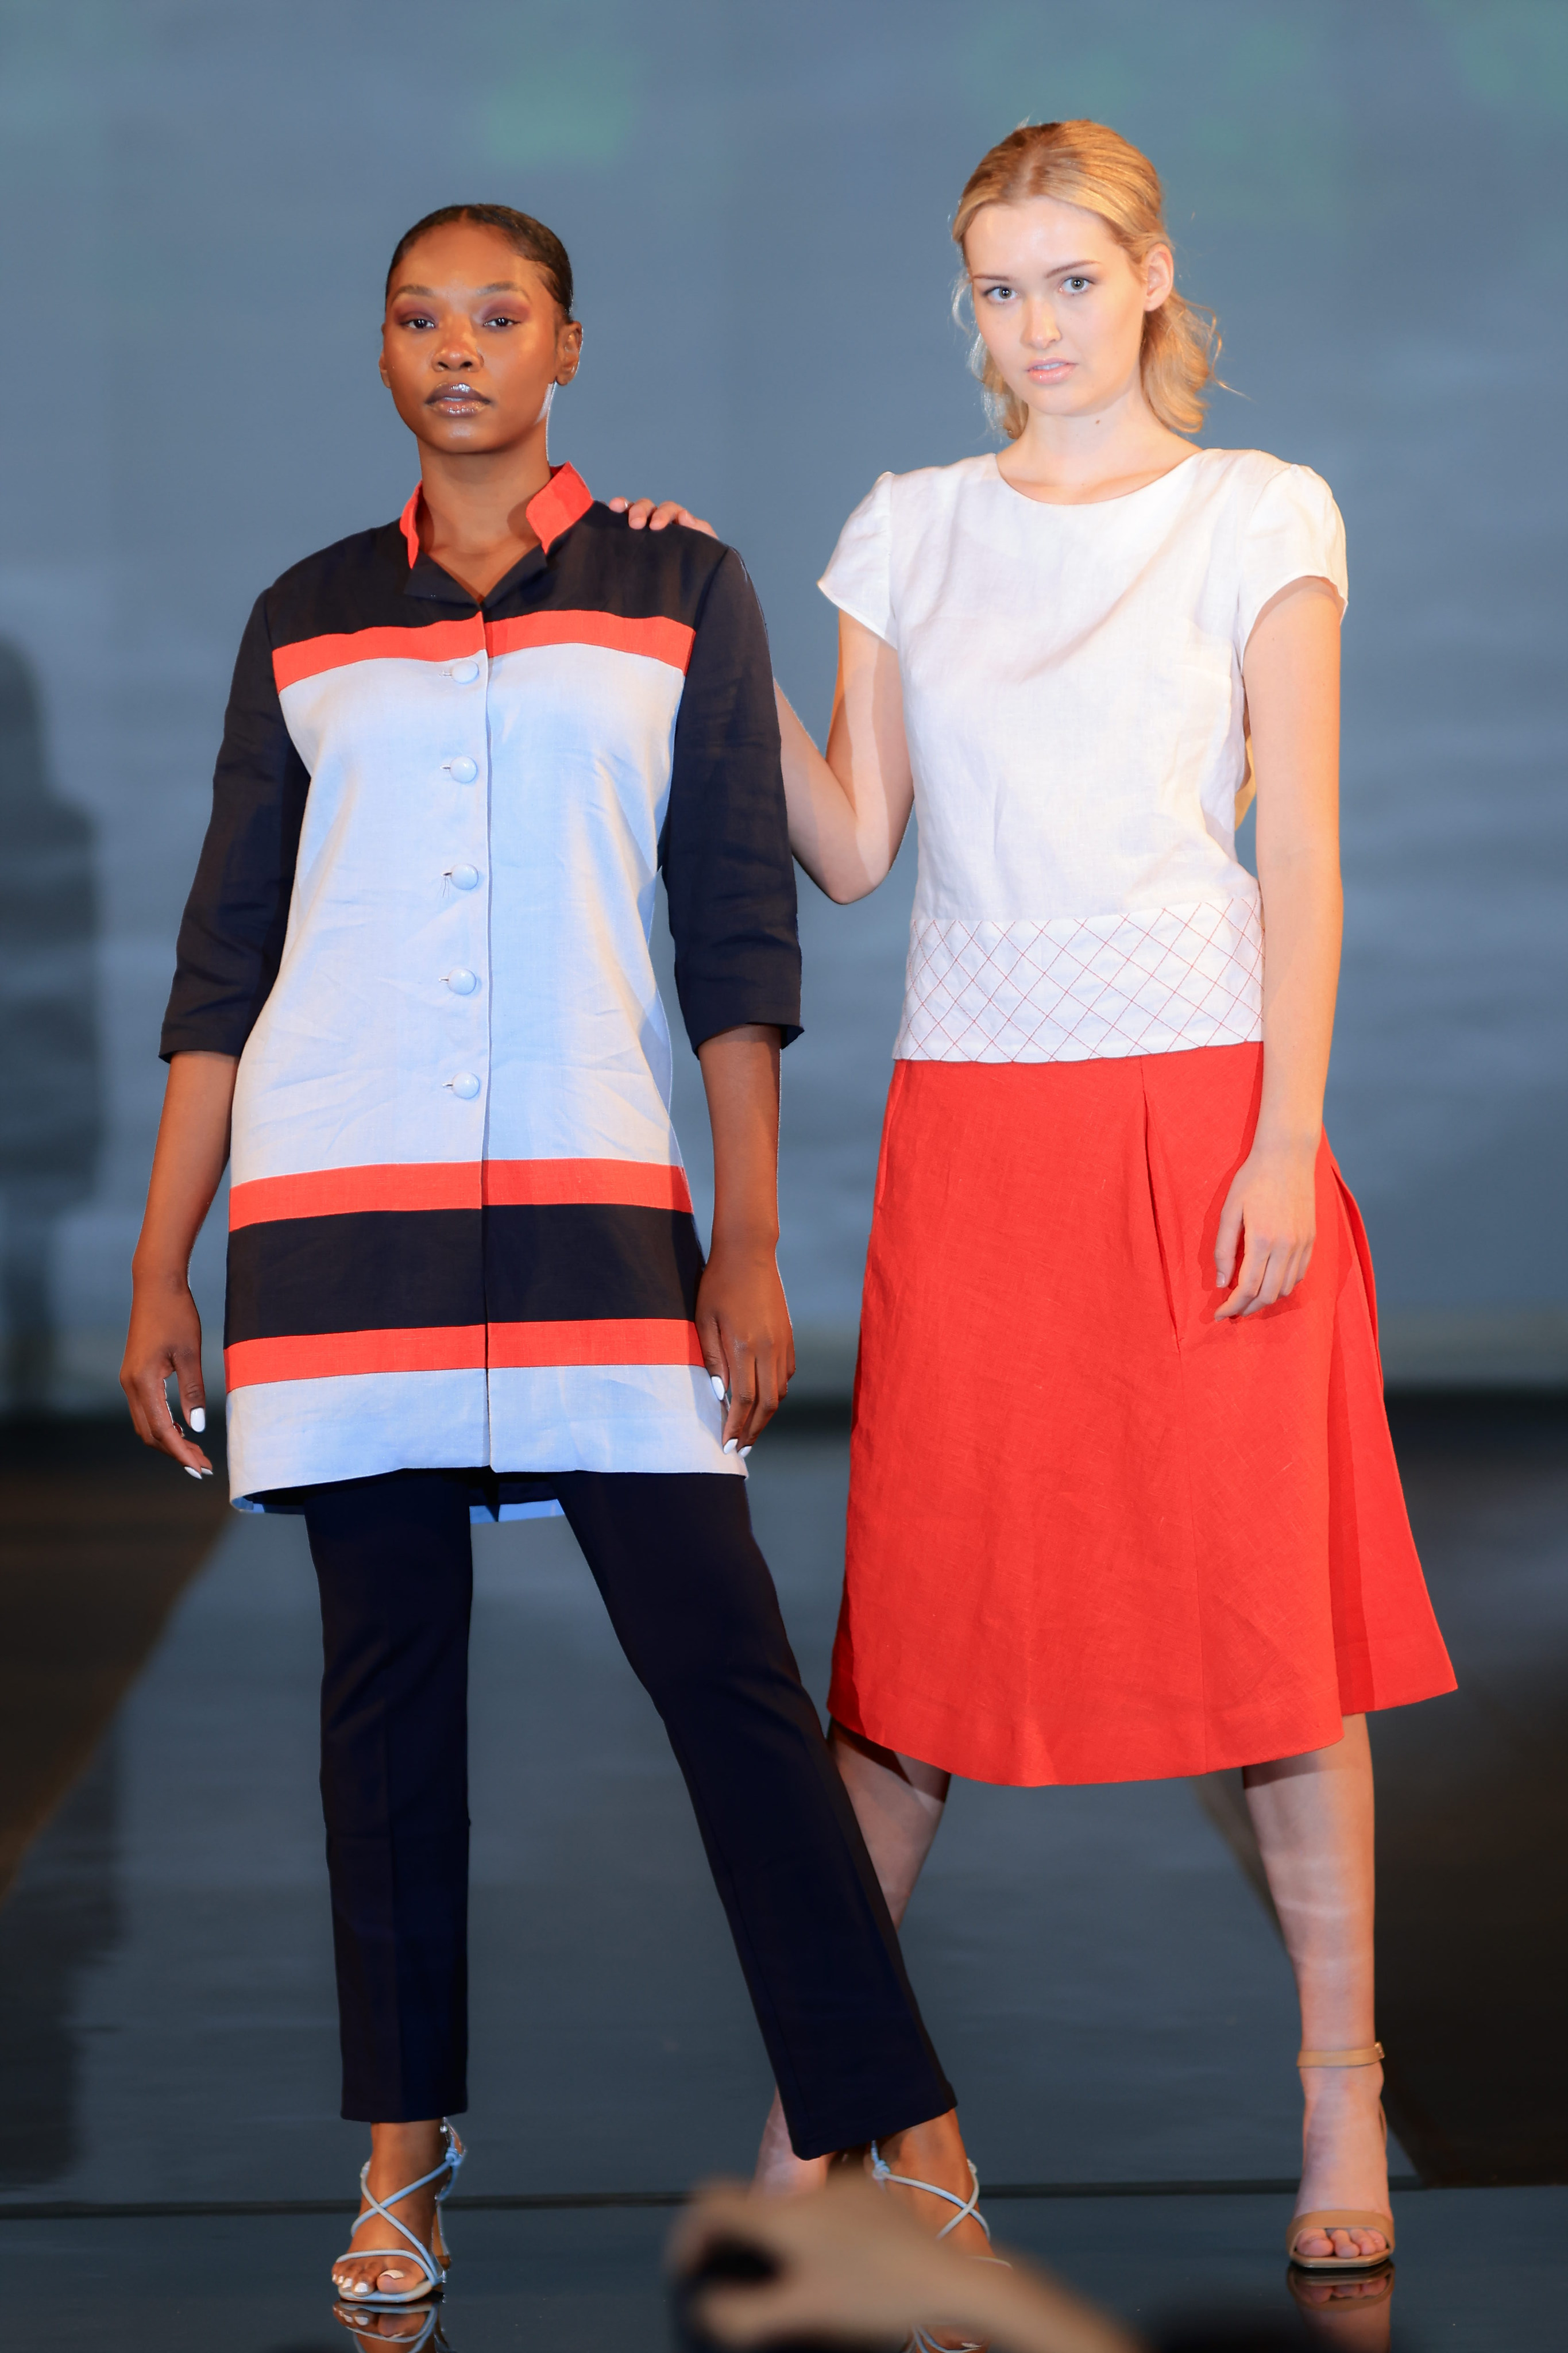 At the runway's end, two models strike a pose. The left model dons a long-sleeved black and red striped top, paired with black slacks and blue heels. Meanwhile, the right model showcases a white patterned top elegantly matched with a vibrant red knee-length skirt.